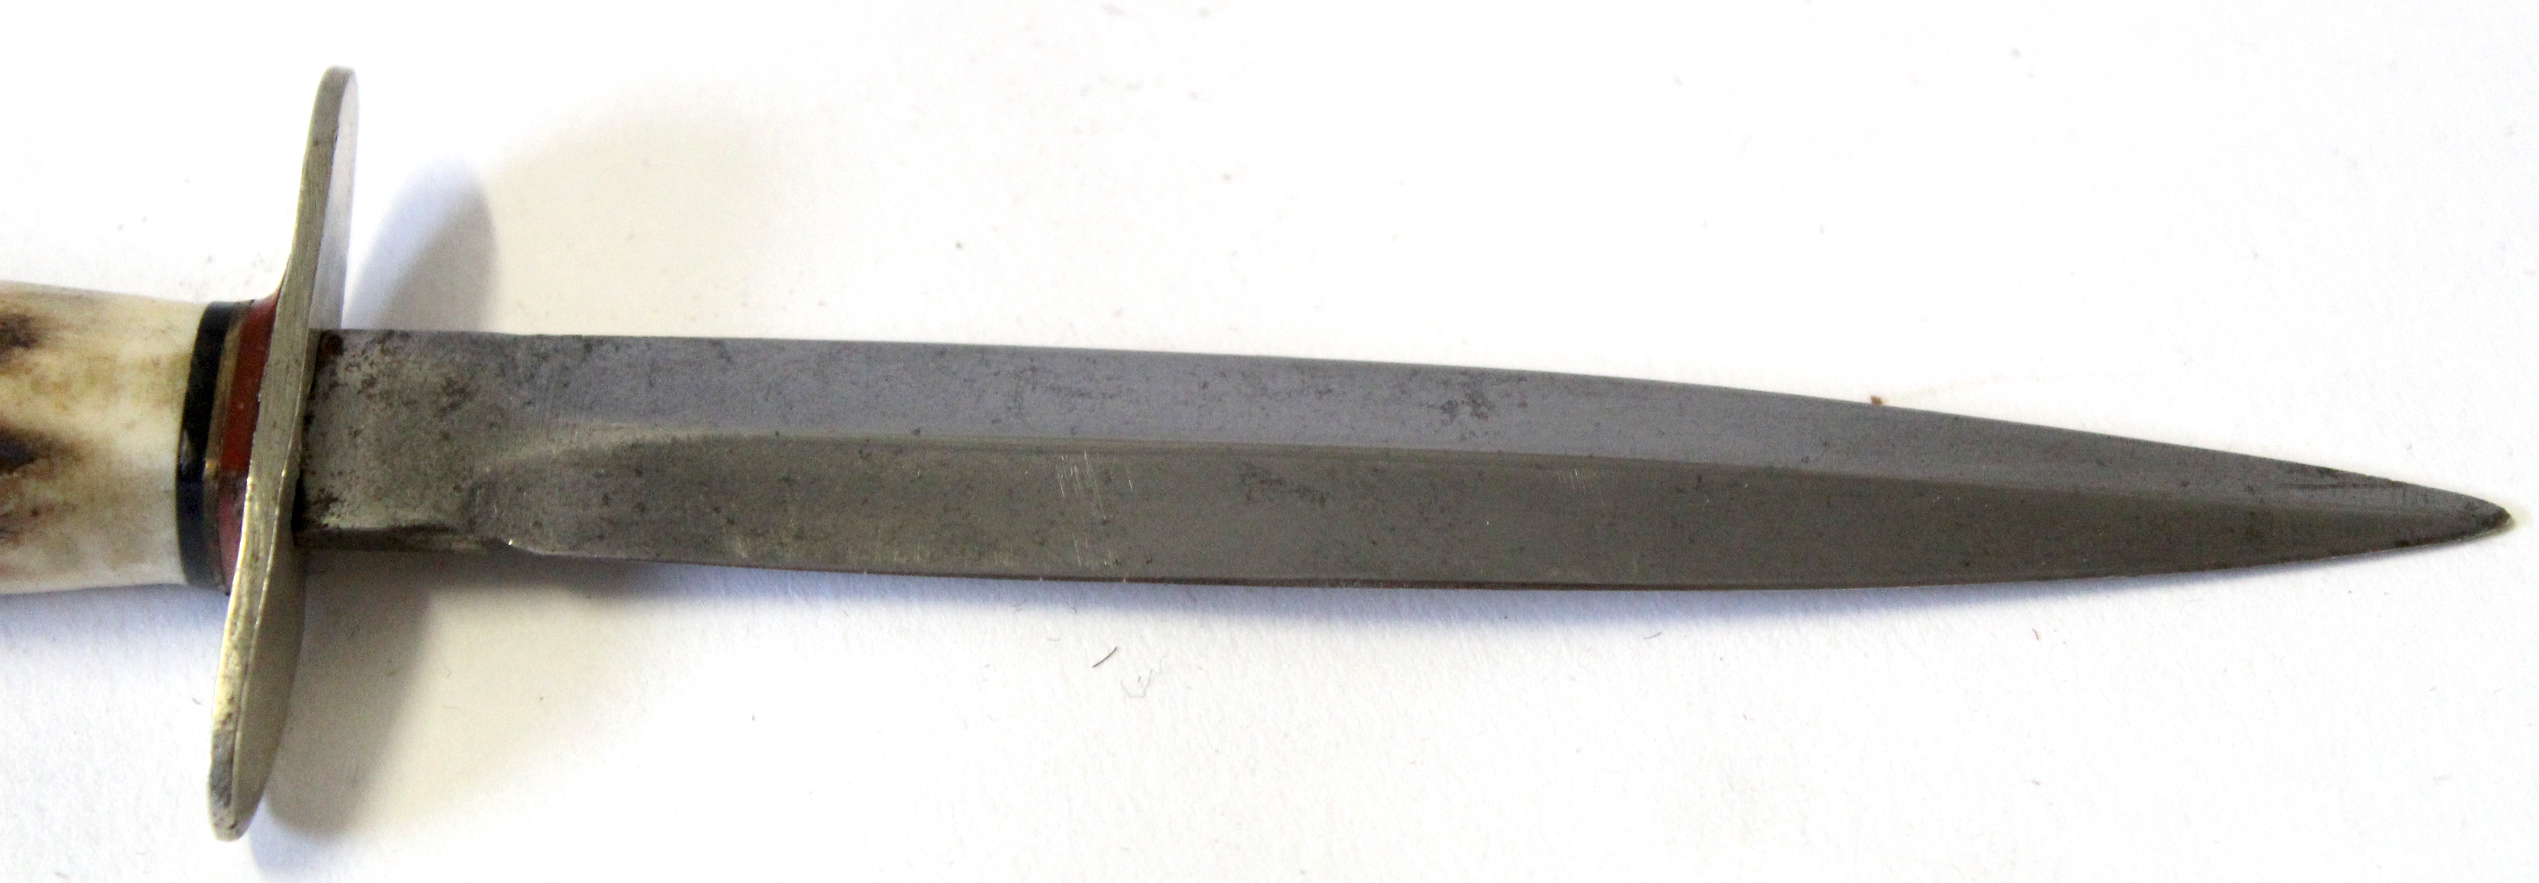 Small dagger with bone handle, the blade marked William Rodgers - Sheffield - Image 3 of 4